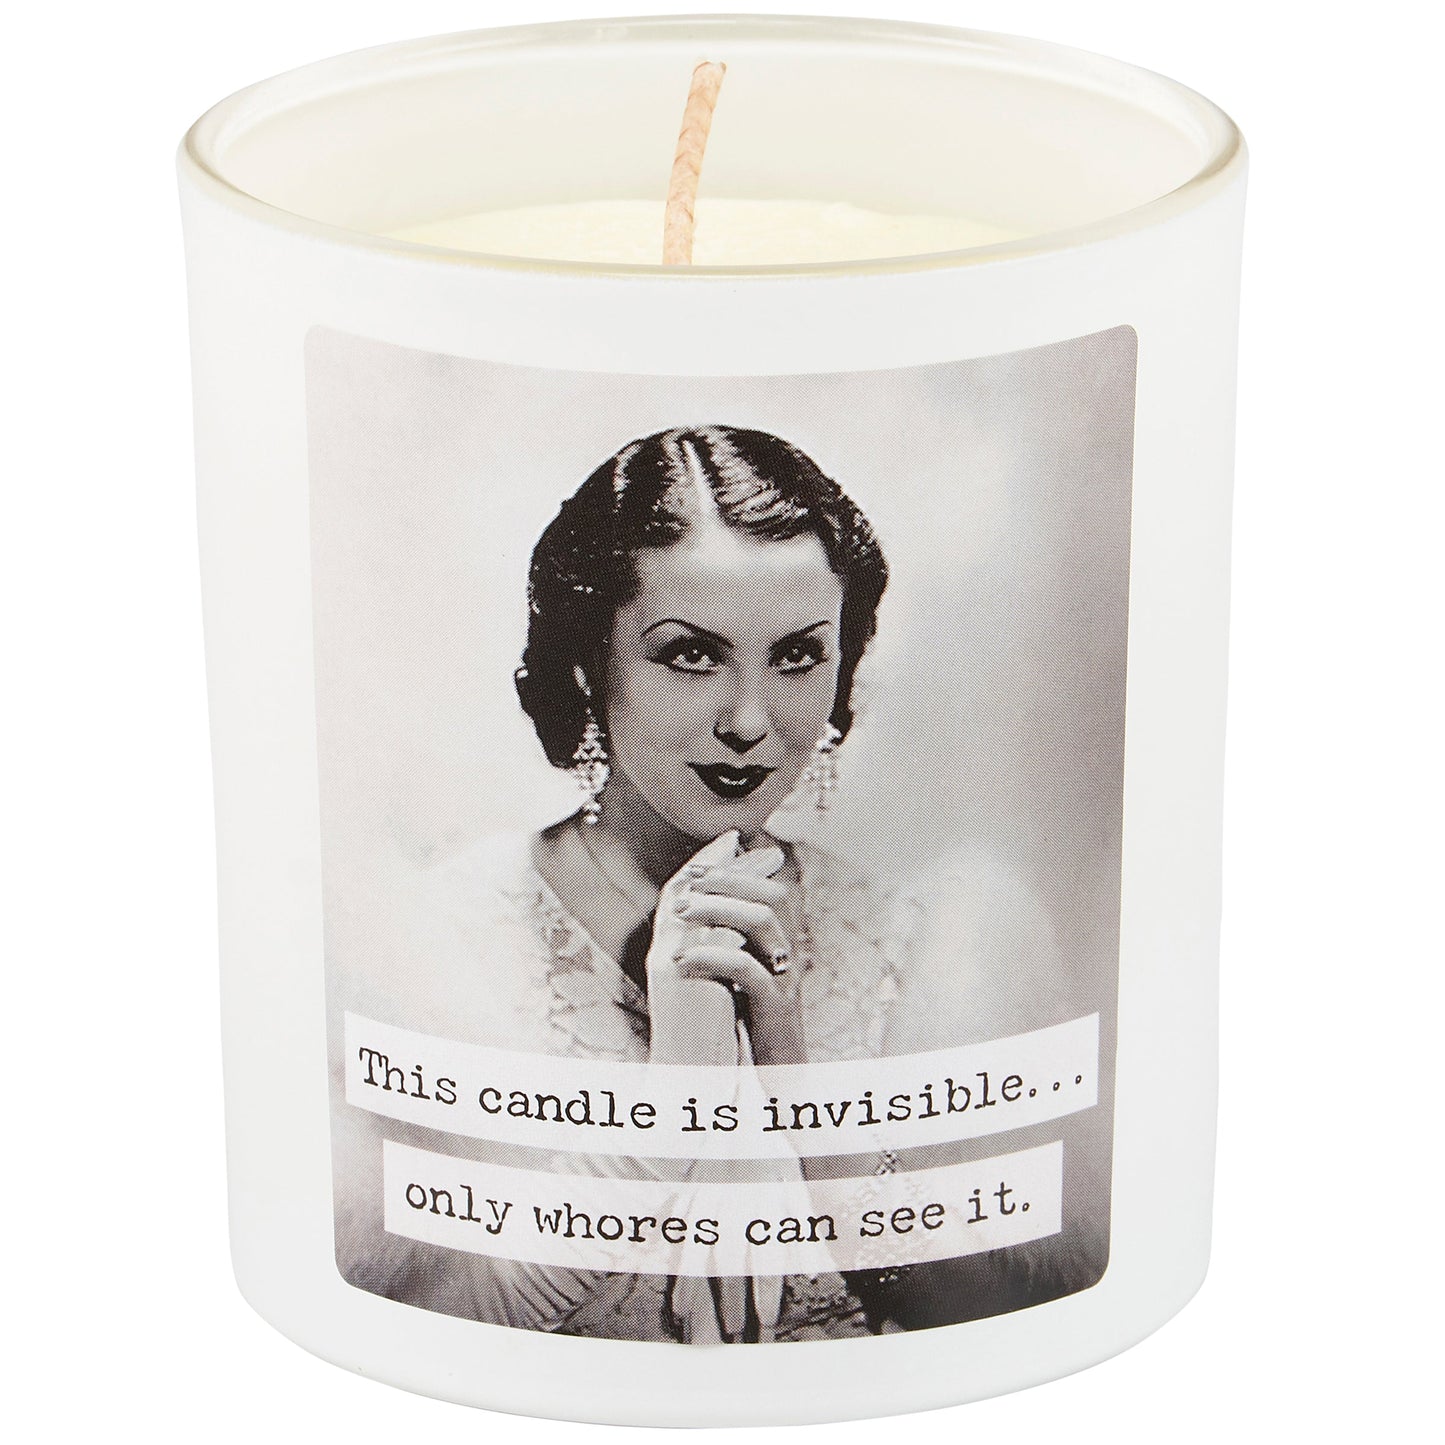 Whores Candle | Vintage Photograph Double Sided Design | Soy Wax Lavender Jasmine Scent